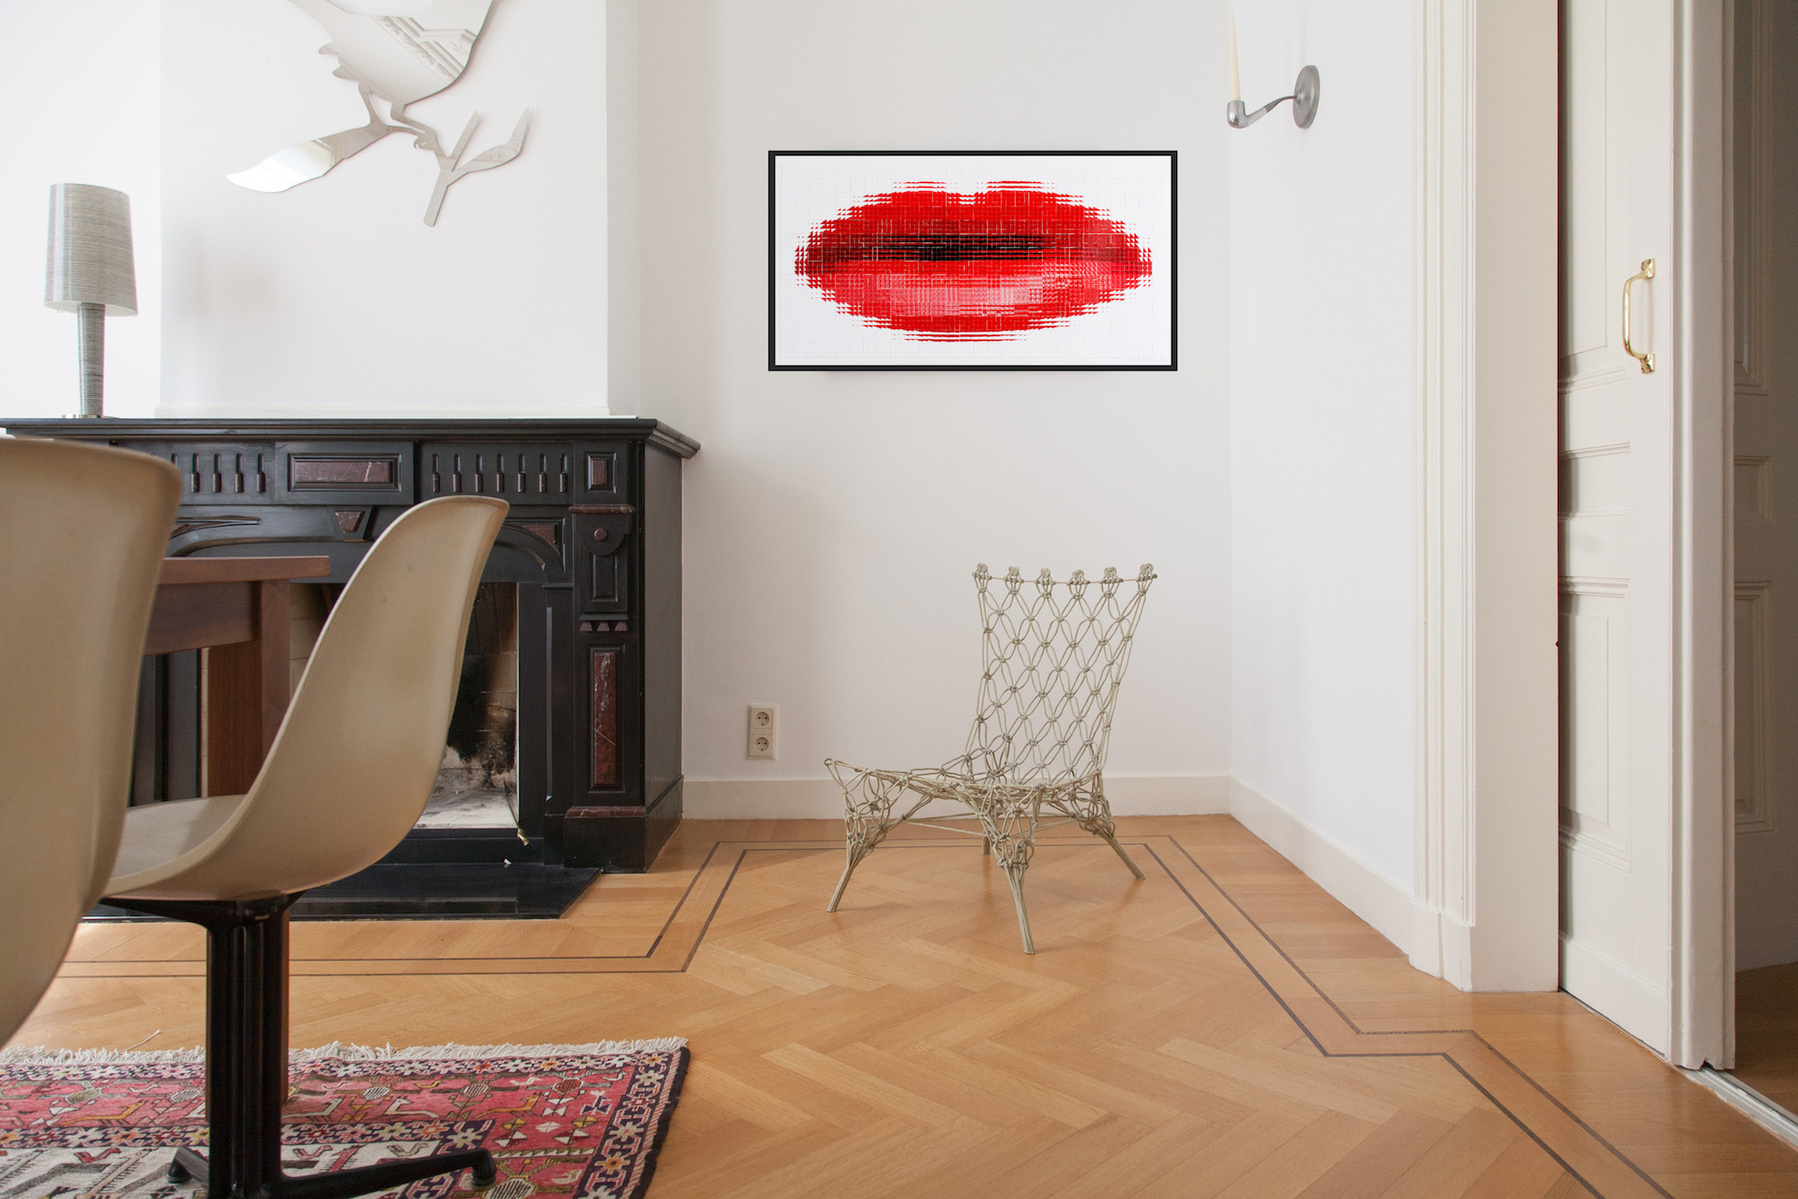 In-situ art, designer living room, floor boards, fire place. Pout #4 large collage of photographs of the artist's red lips wearing lipstick forming one large mouth on white background. By Tasmanian contemporary visual artist Di Allison HALLISON Studios.